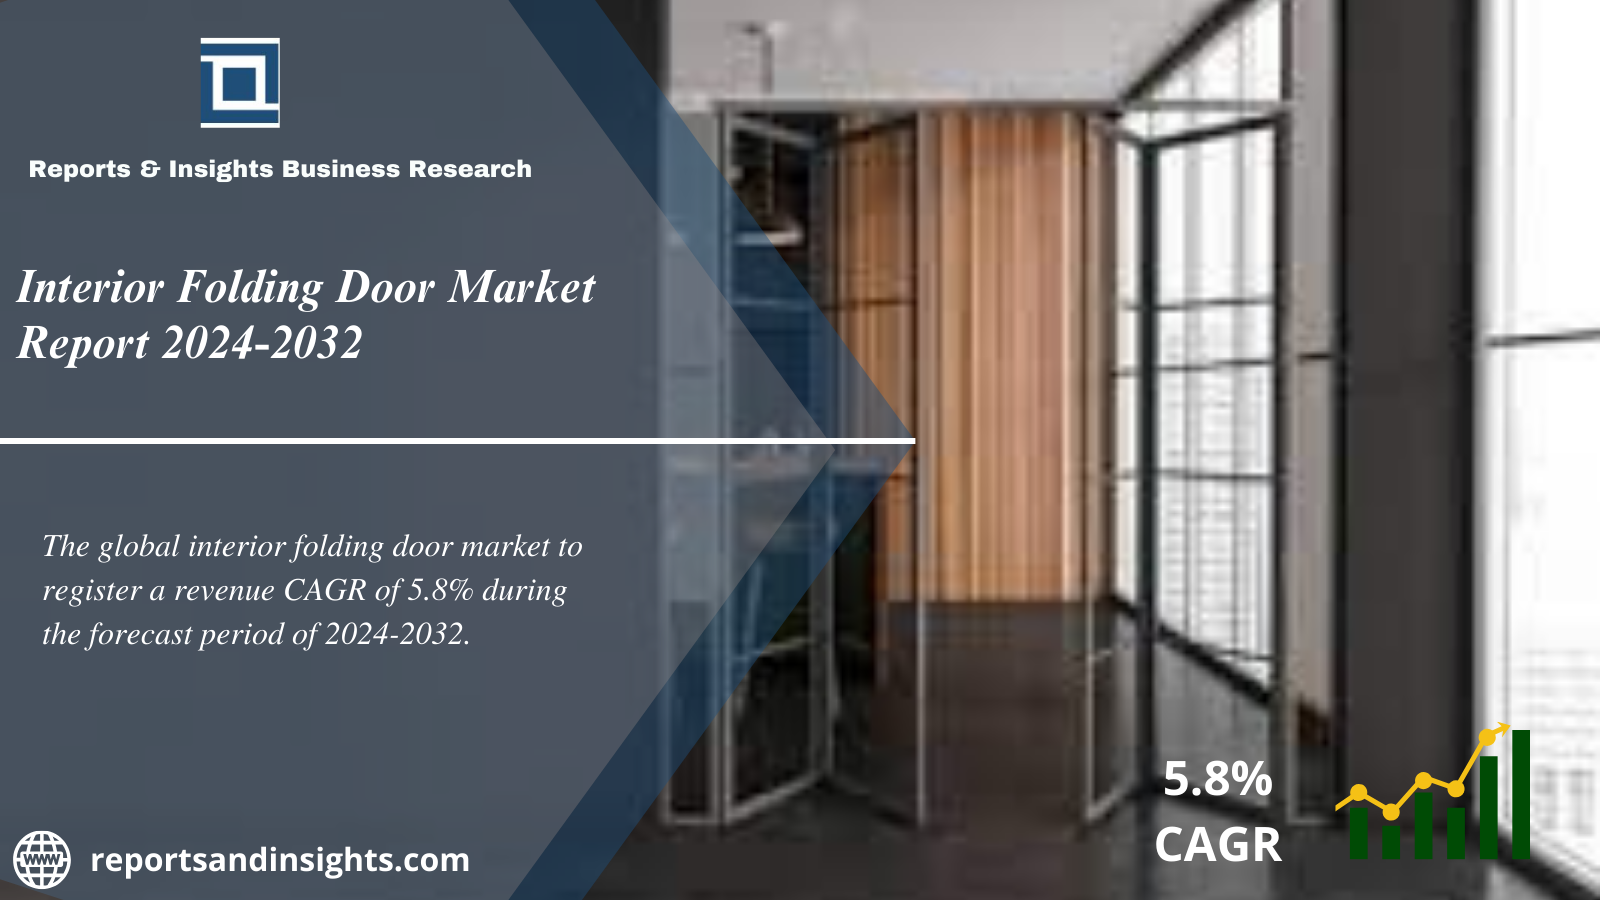 Interior Folding Door Market Size, Share, Trends, Analysis and Research Report 2024 to 2032